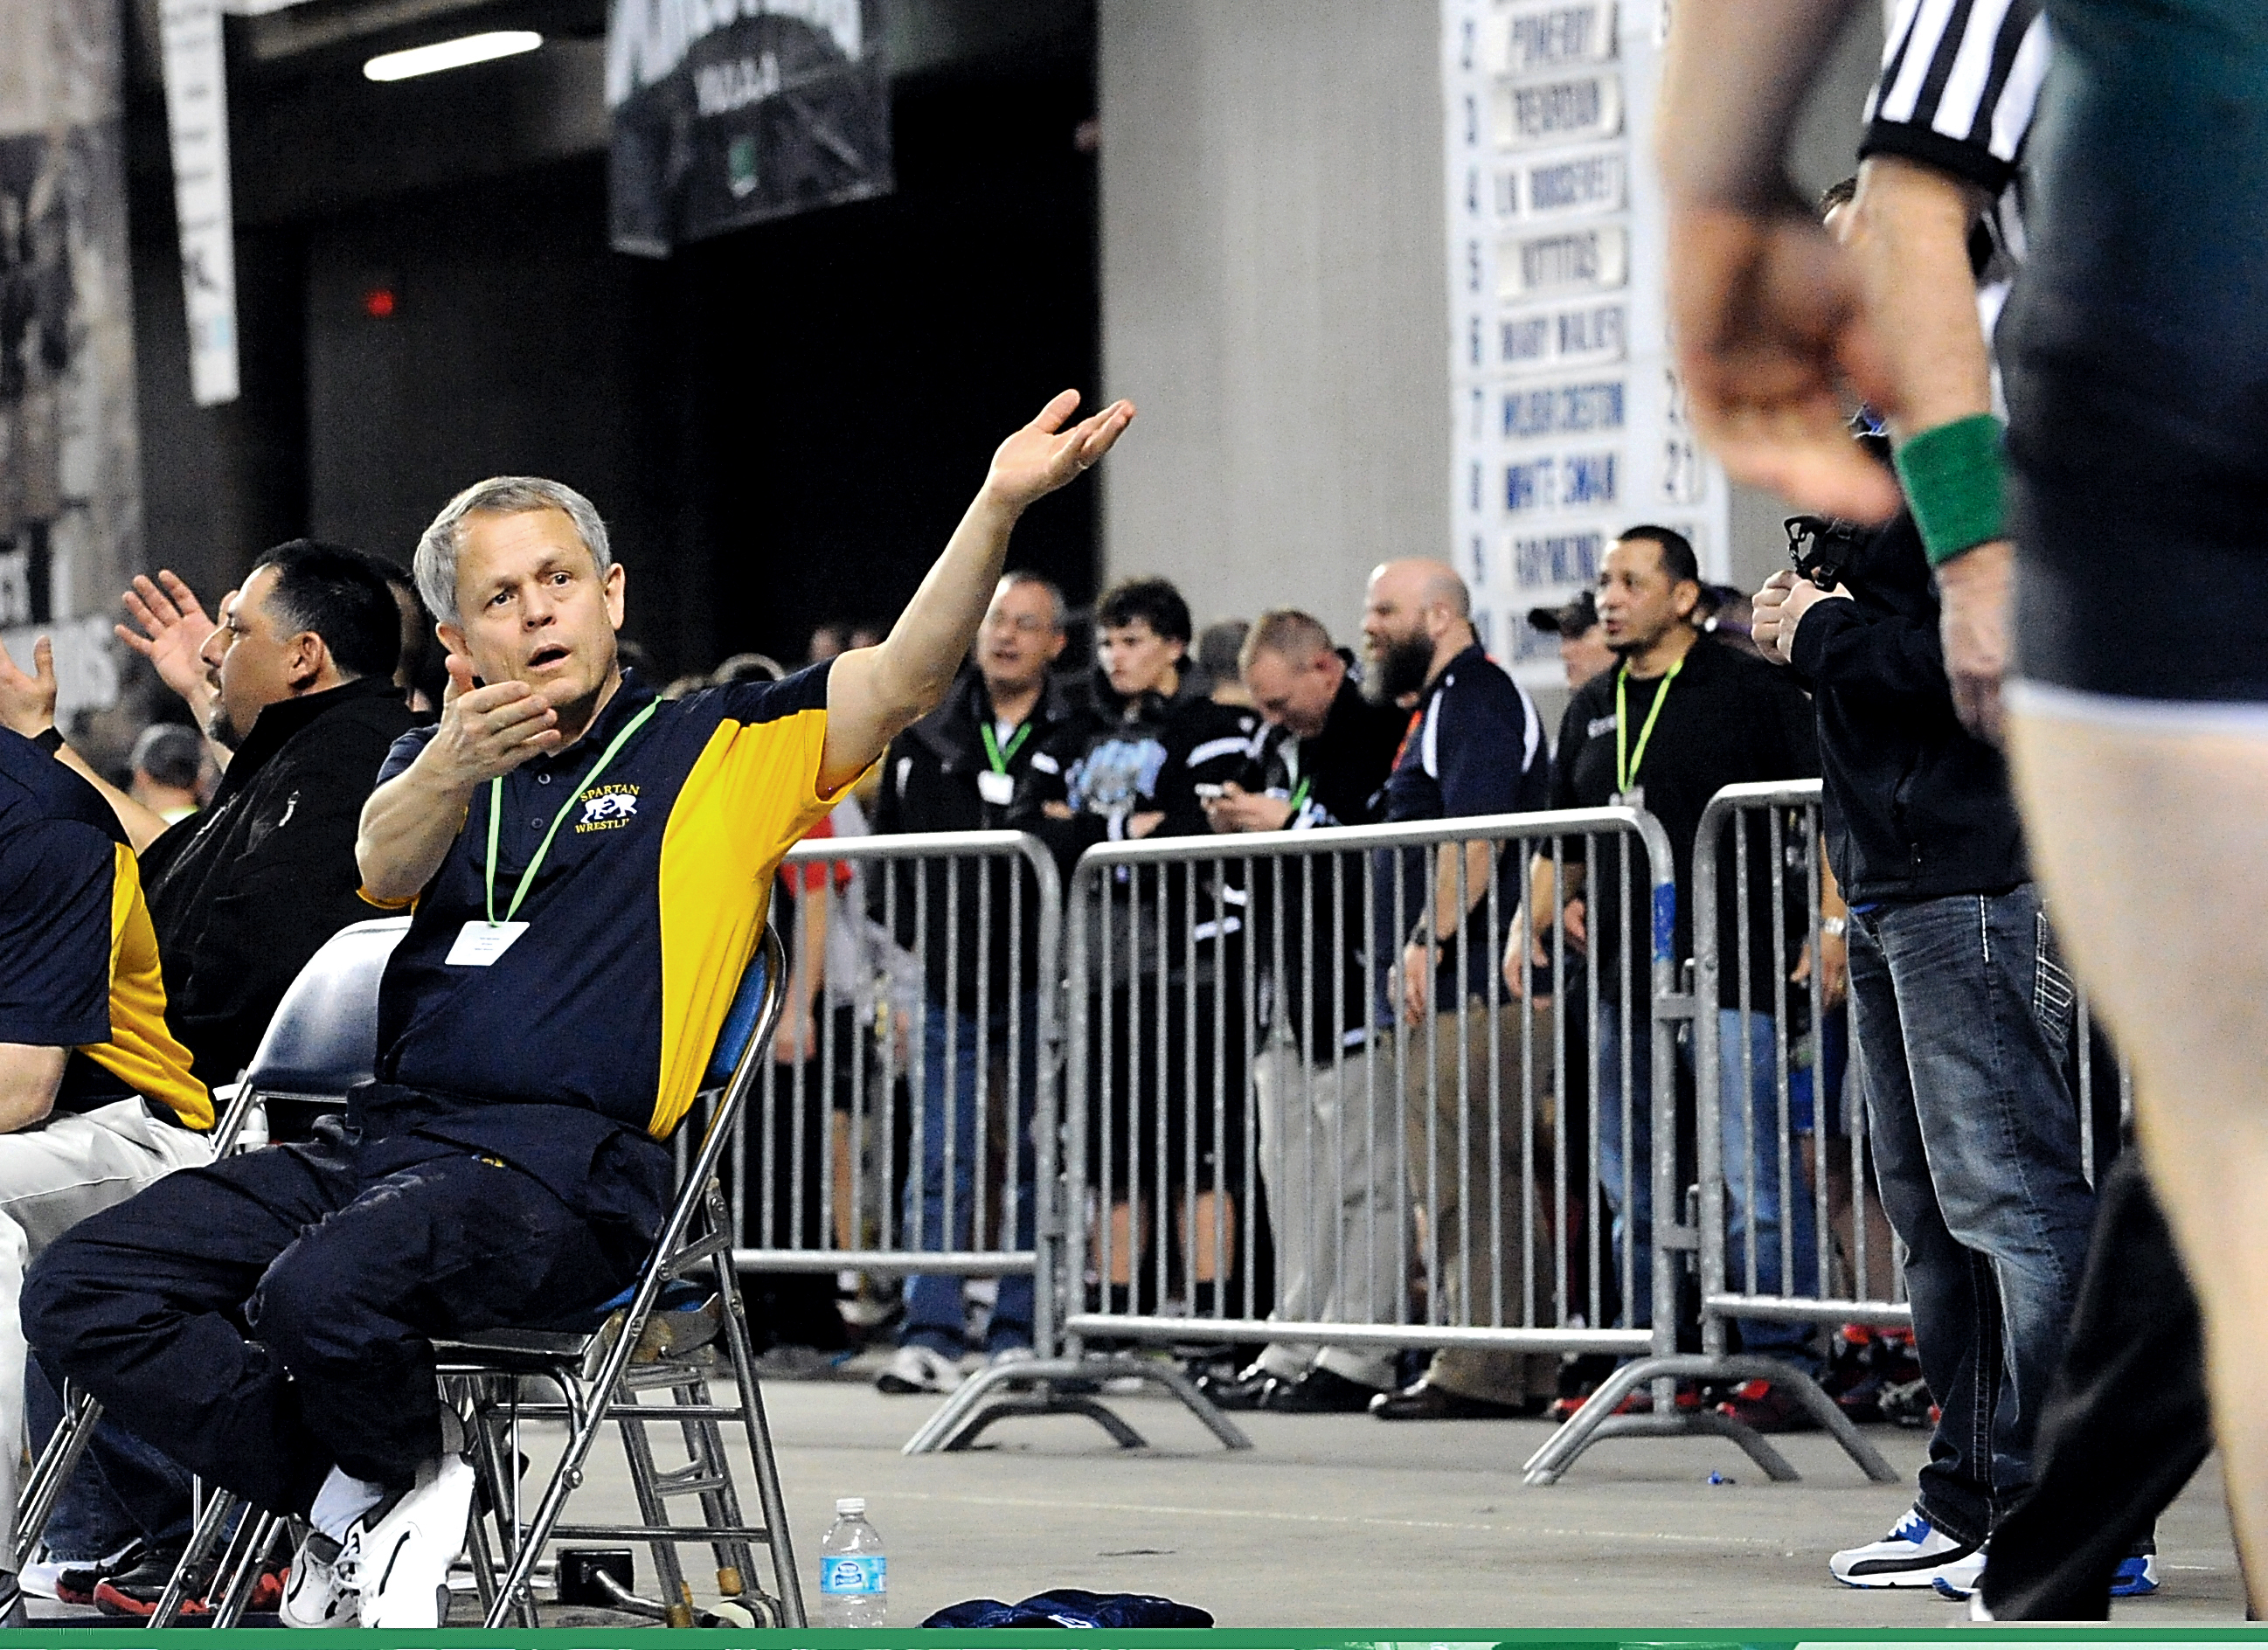 Forks wrestling coach Bob Wheeler gestures during Mat Classic XXV at the Tacoma Dome in 2013. Wheeler will be inducted into the Washington State Wrestling Coaches Association Hall of Fame on Saturday. Lonnie Archibald/for Peninsula Daily News